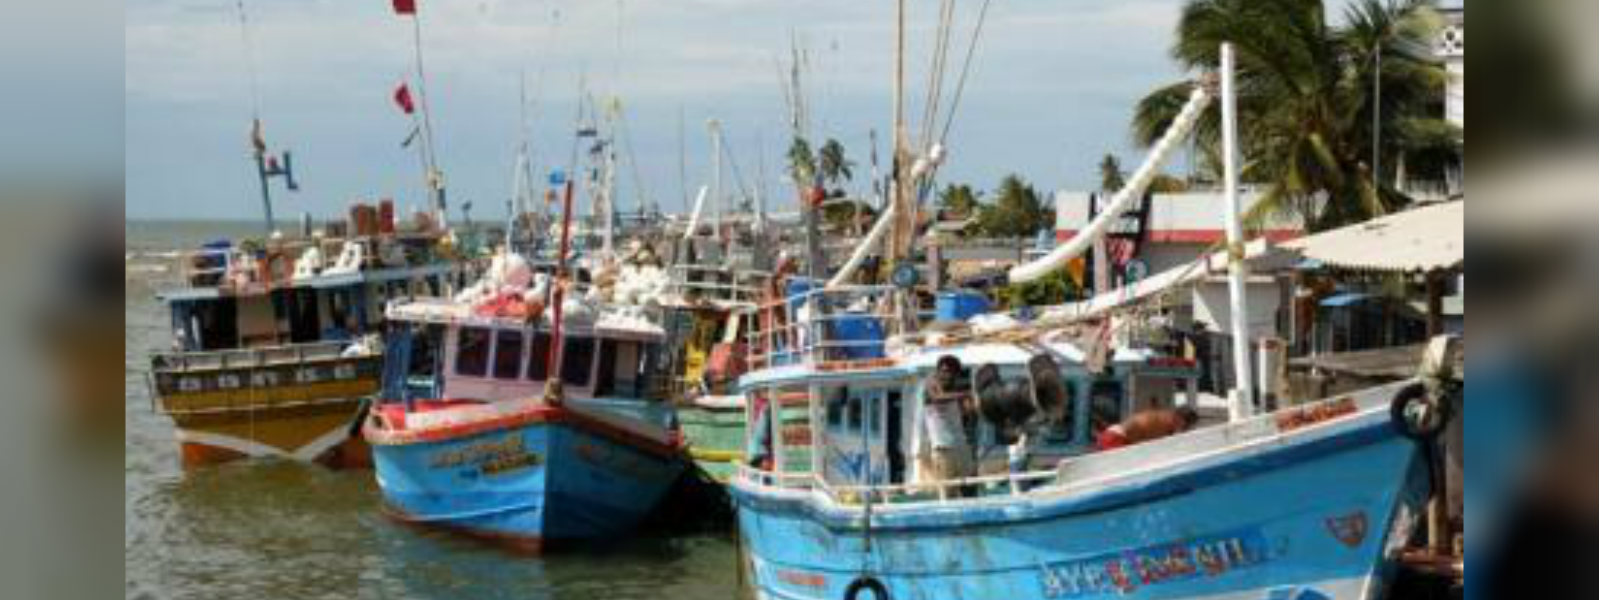 Two fishing boats reported missing 